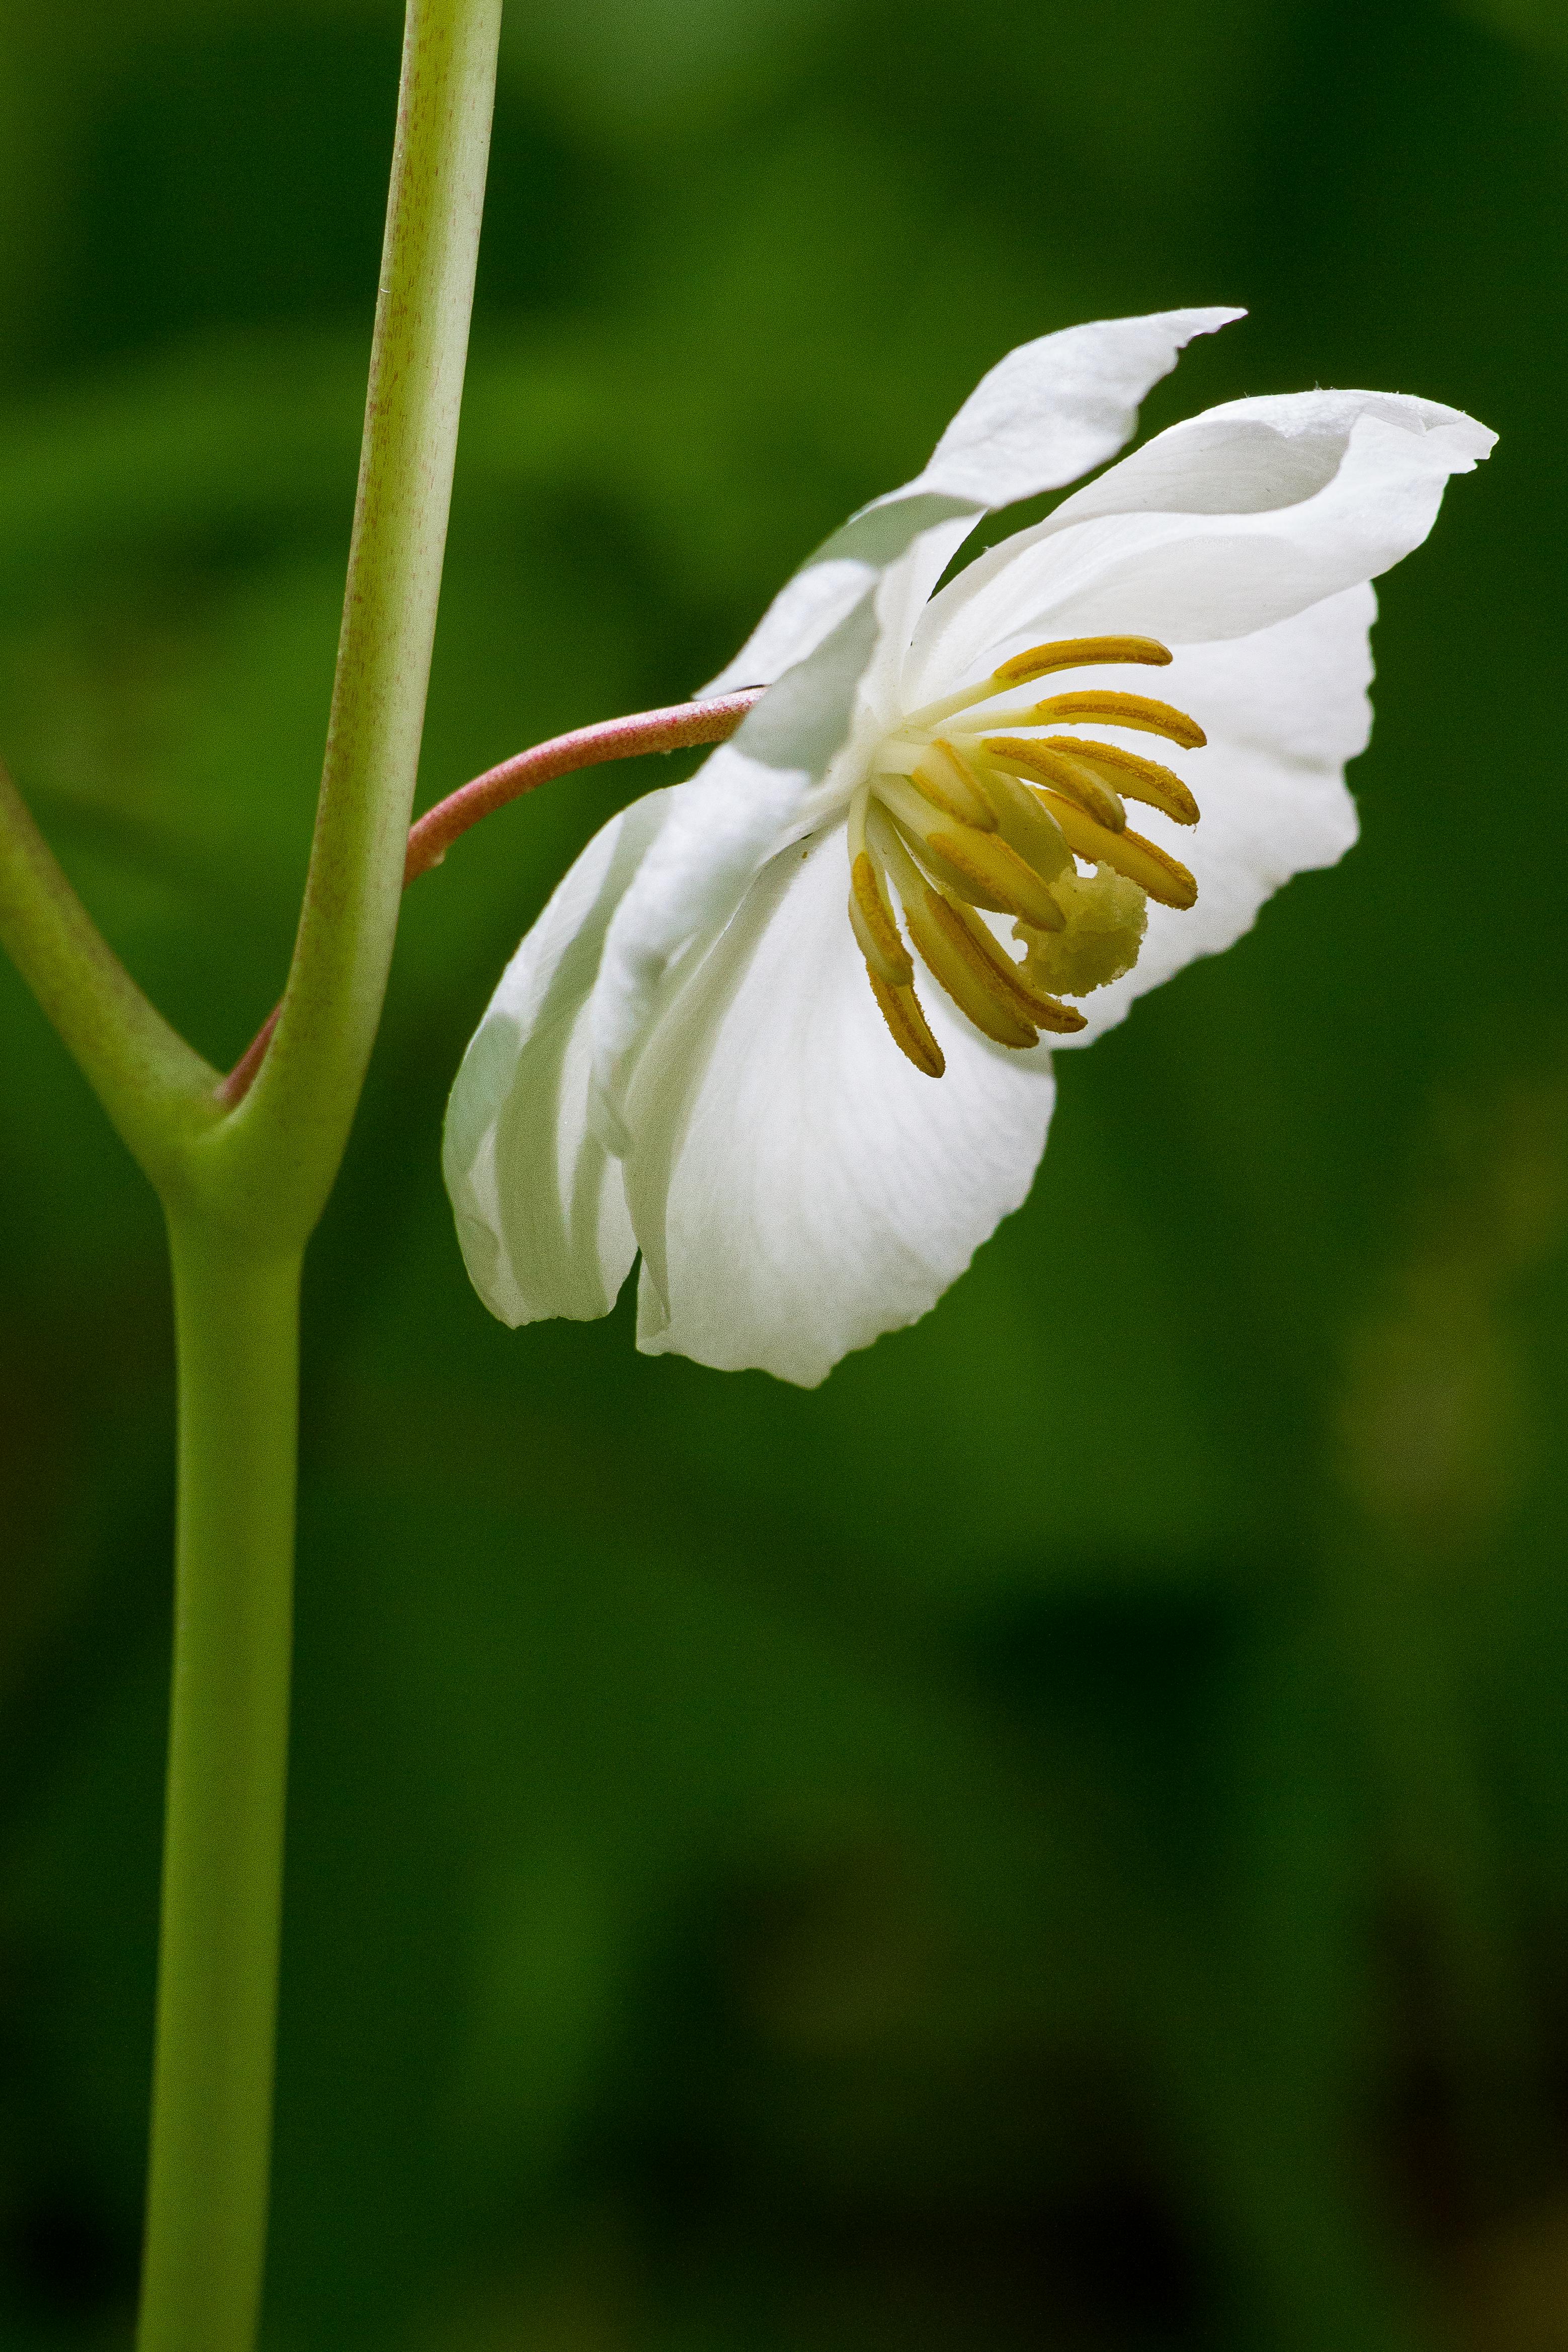 A four-petaled white flower on a delicate stem.